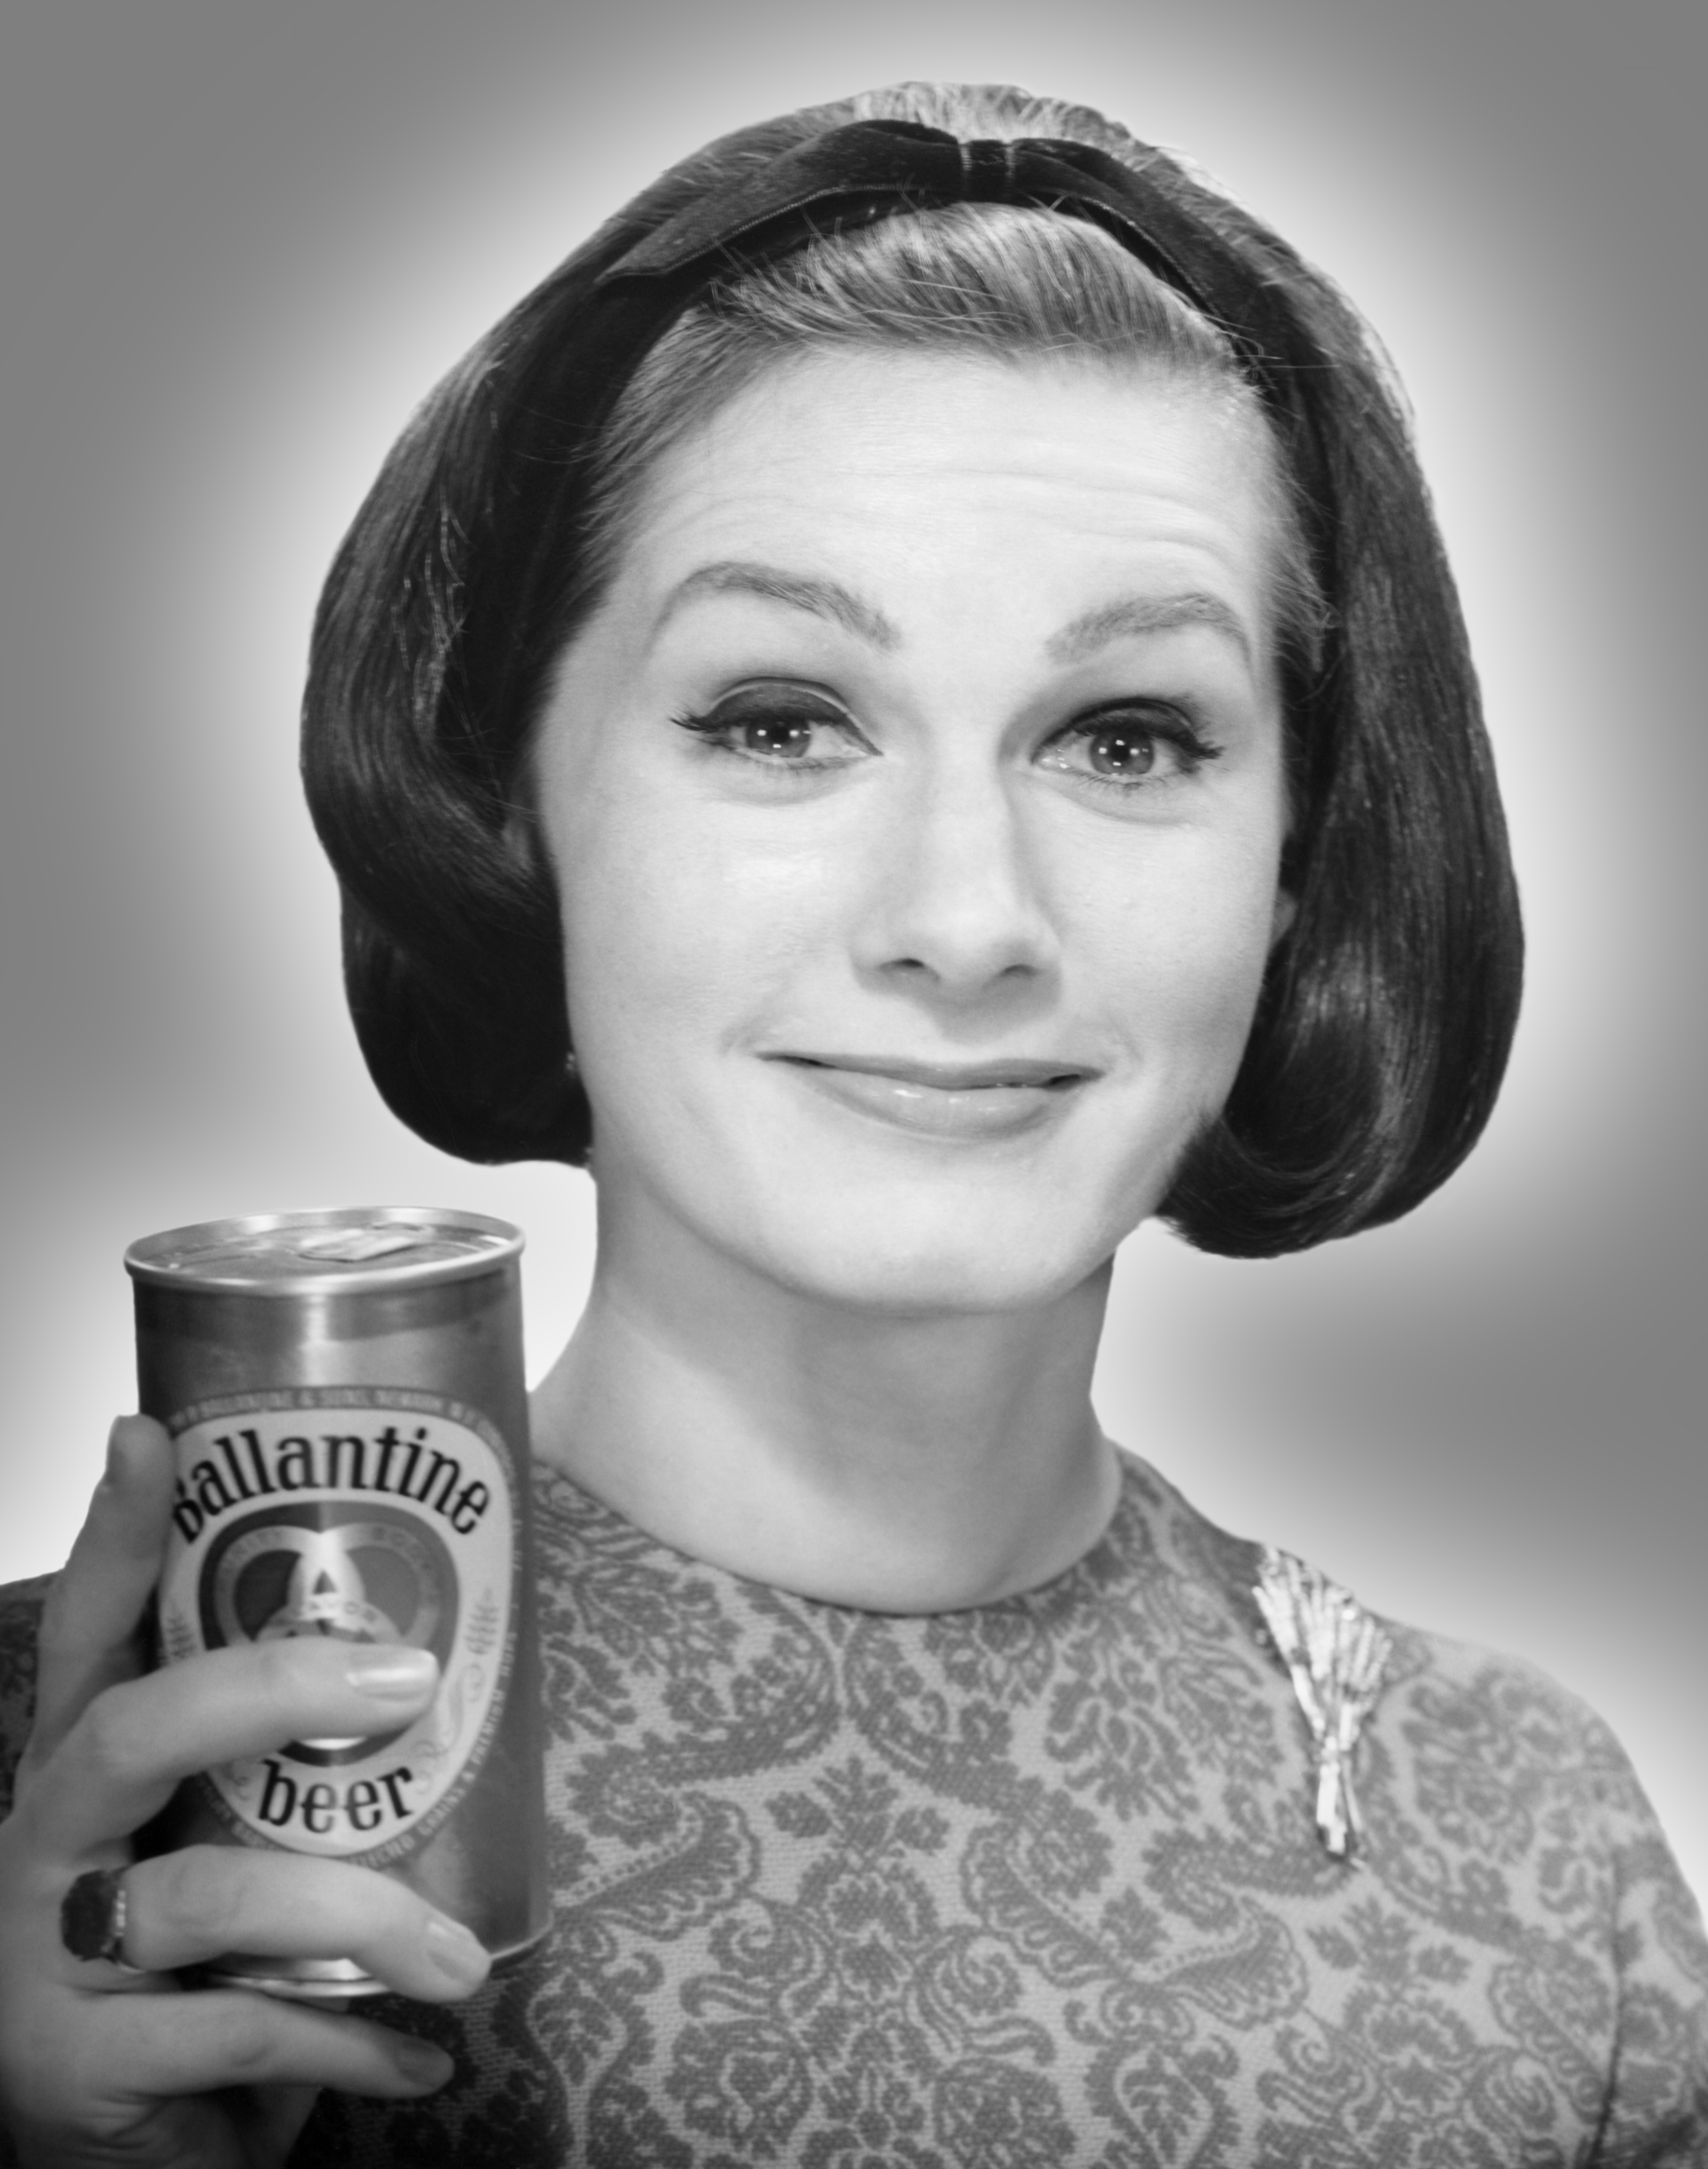 Woman holding can of beer, circa 1950s. (George Marks&mdash;Retrofile/Getty Images)